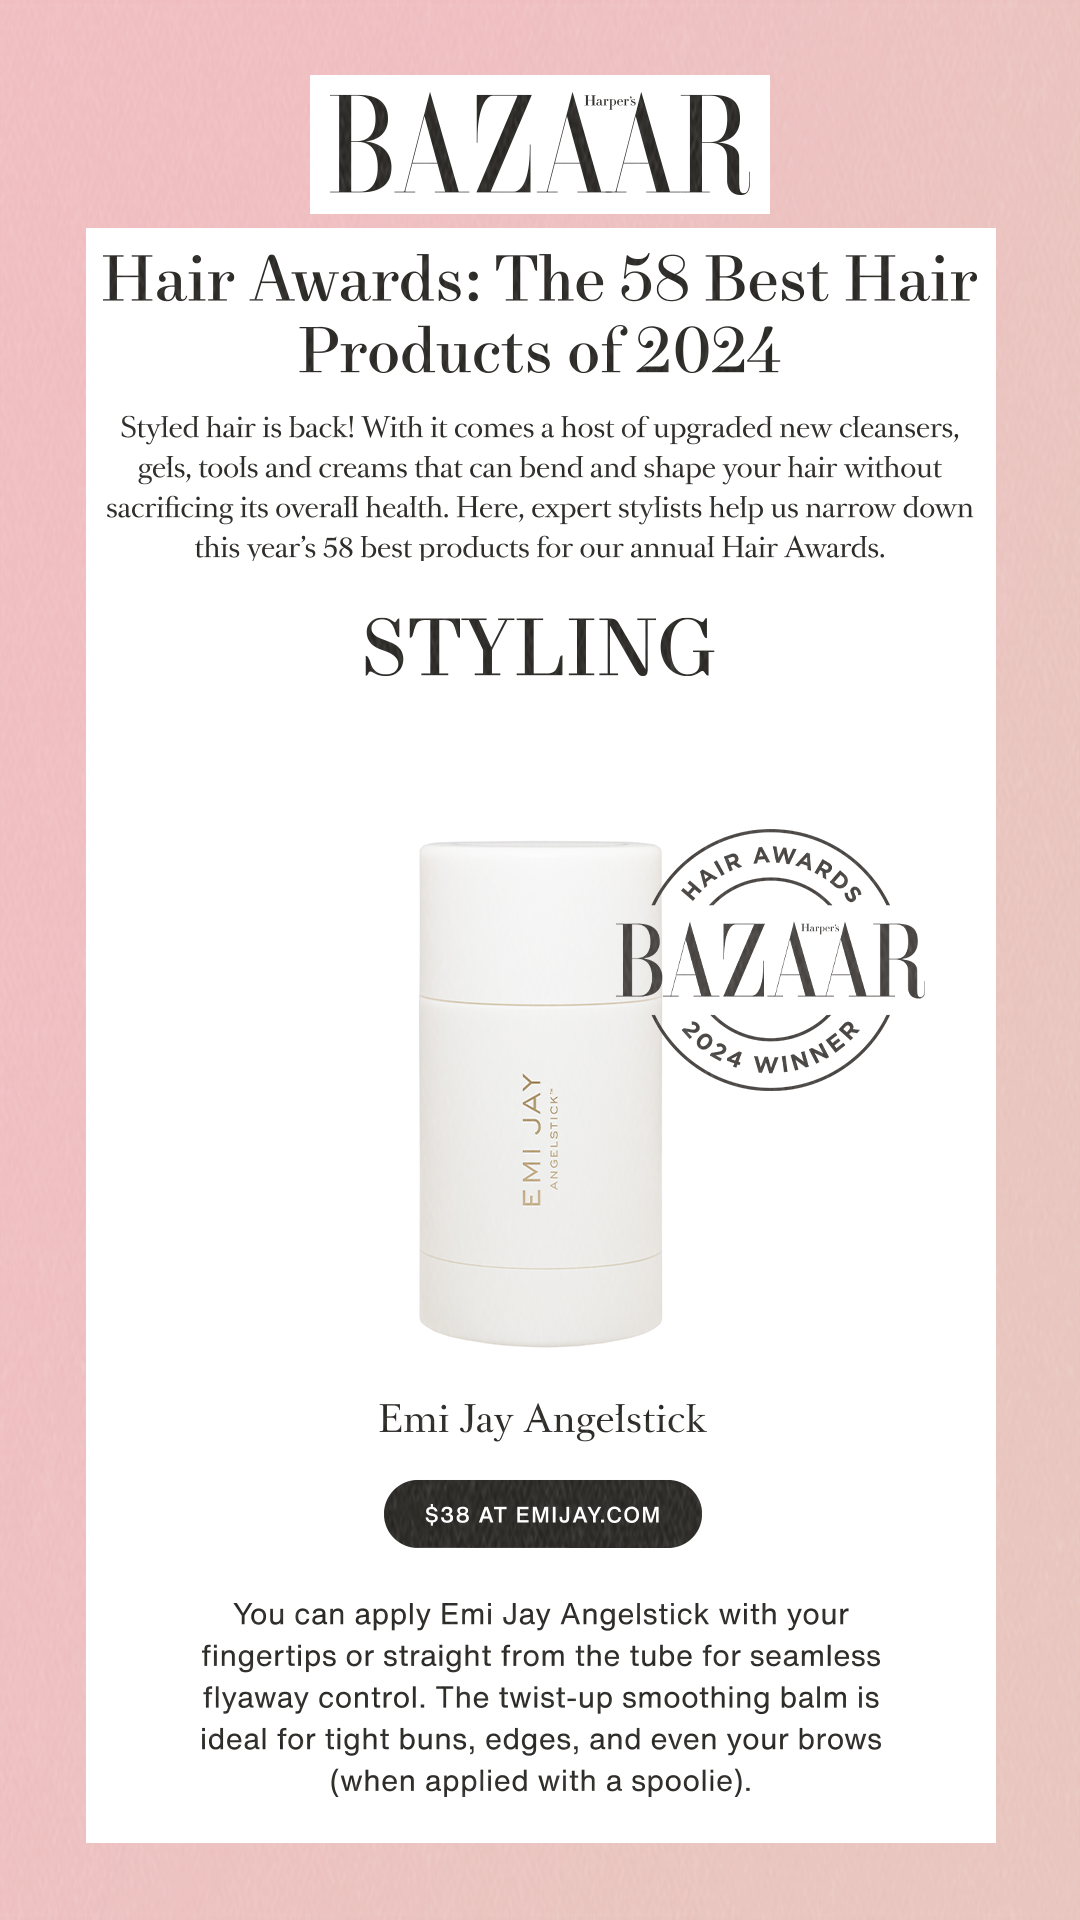 Hair Awards: The 58 Best Hair Products of 2024Styled hair is back! With it comes a host of upgraded new cleansers, gels, tools and creams that can bend and shape your hair without sacrificing its overall health. Here, expert stylists help us narrow down this year’s 58 best products for our annual Hair Awards.STYLING  Best for Slick Styles Angelstick$38 at emijay.comYou can apply Emi Jay Angelstick with your fingertips or straight from the tube for seamless flyaway control. The twist-up smoothing balm is ideal for tight buns, edges, and even your brows (when applied with a spoolie).